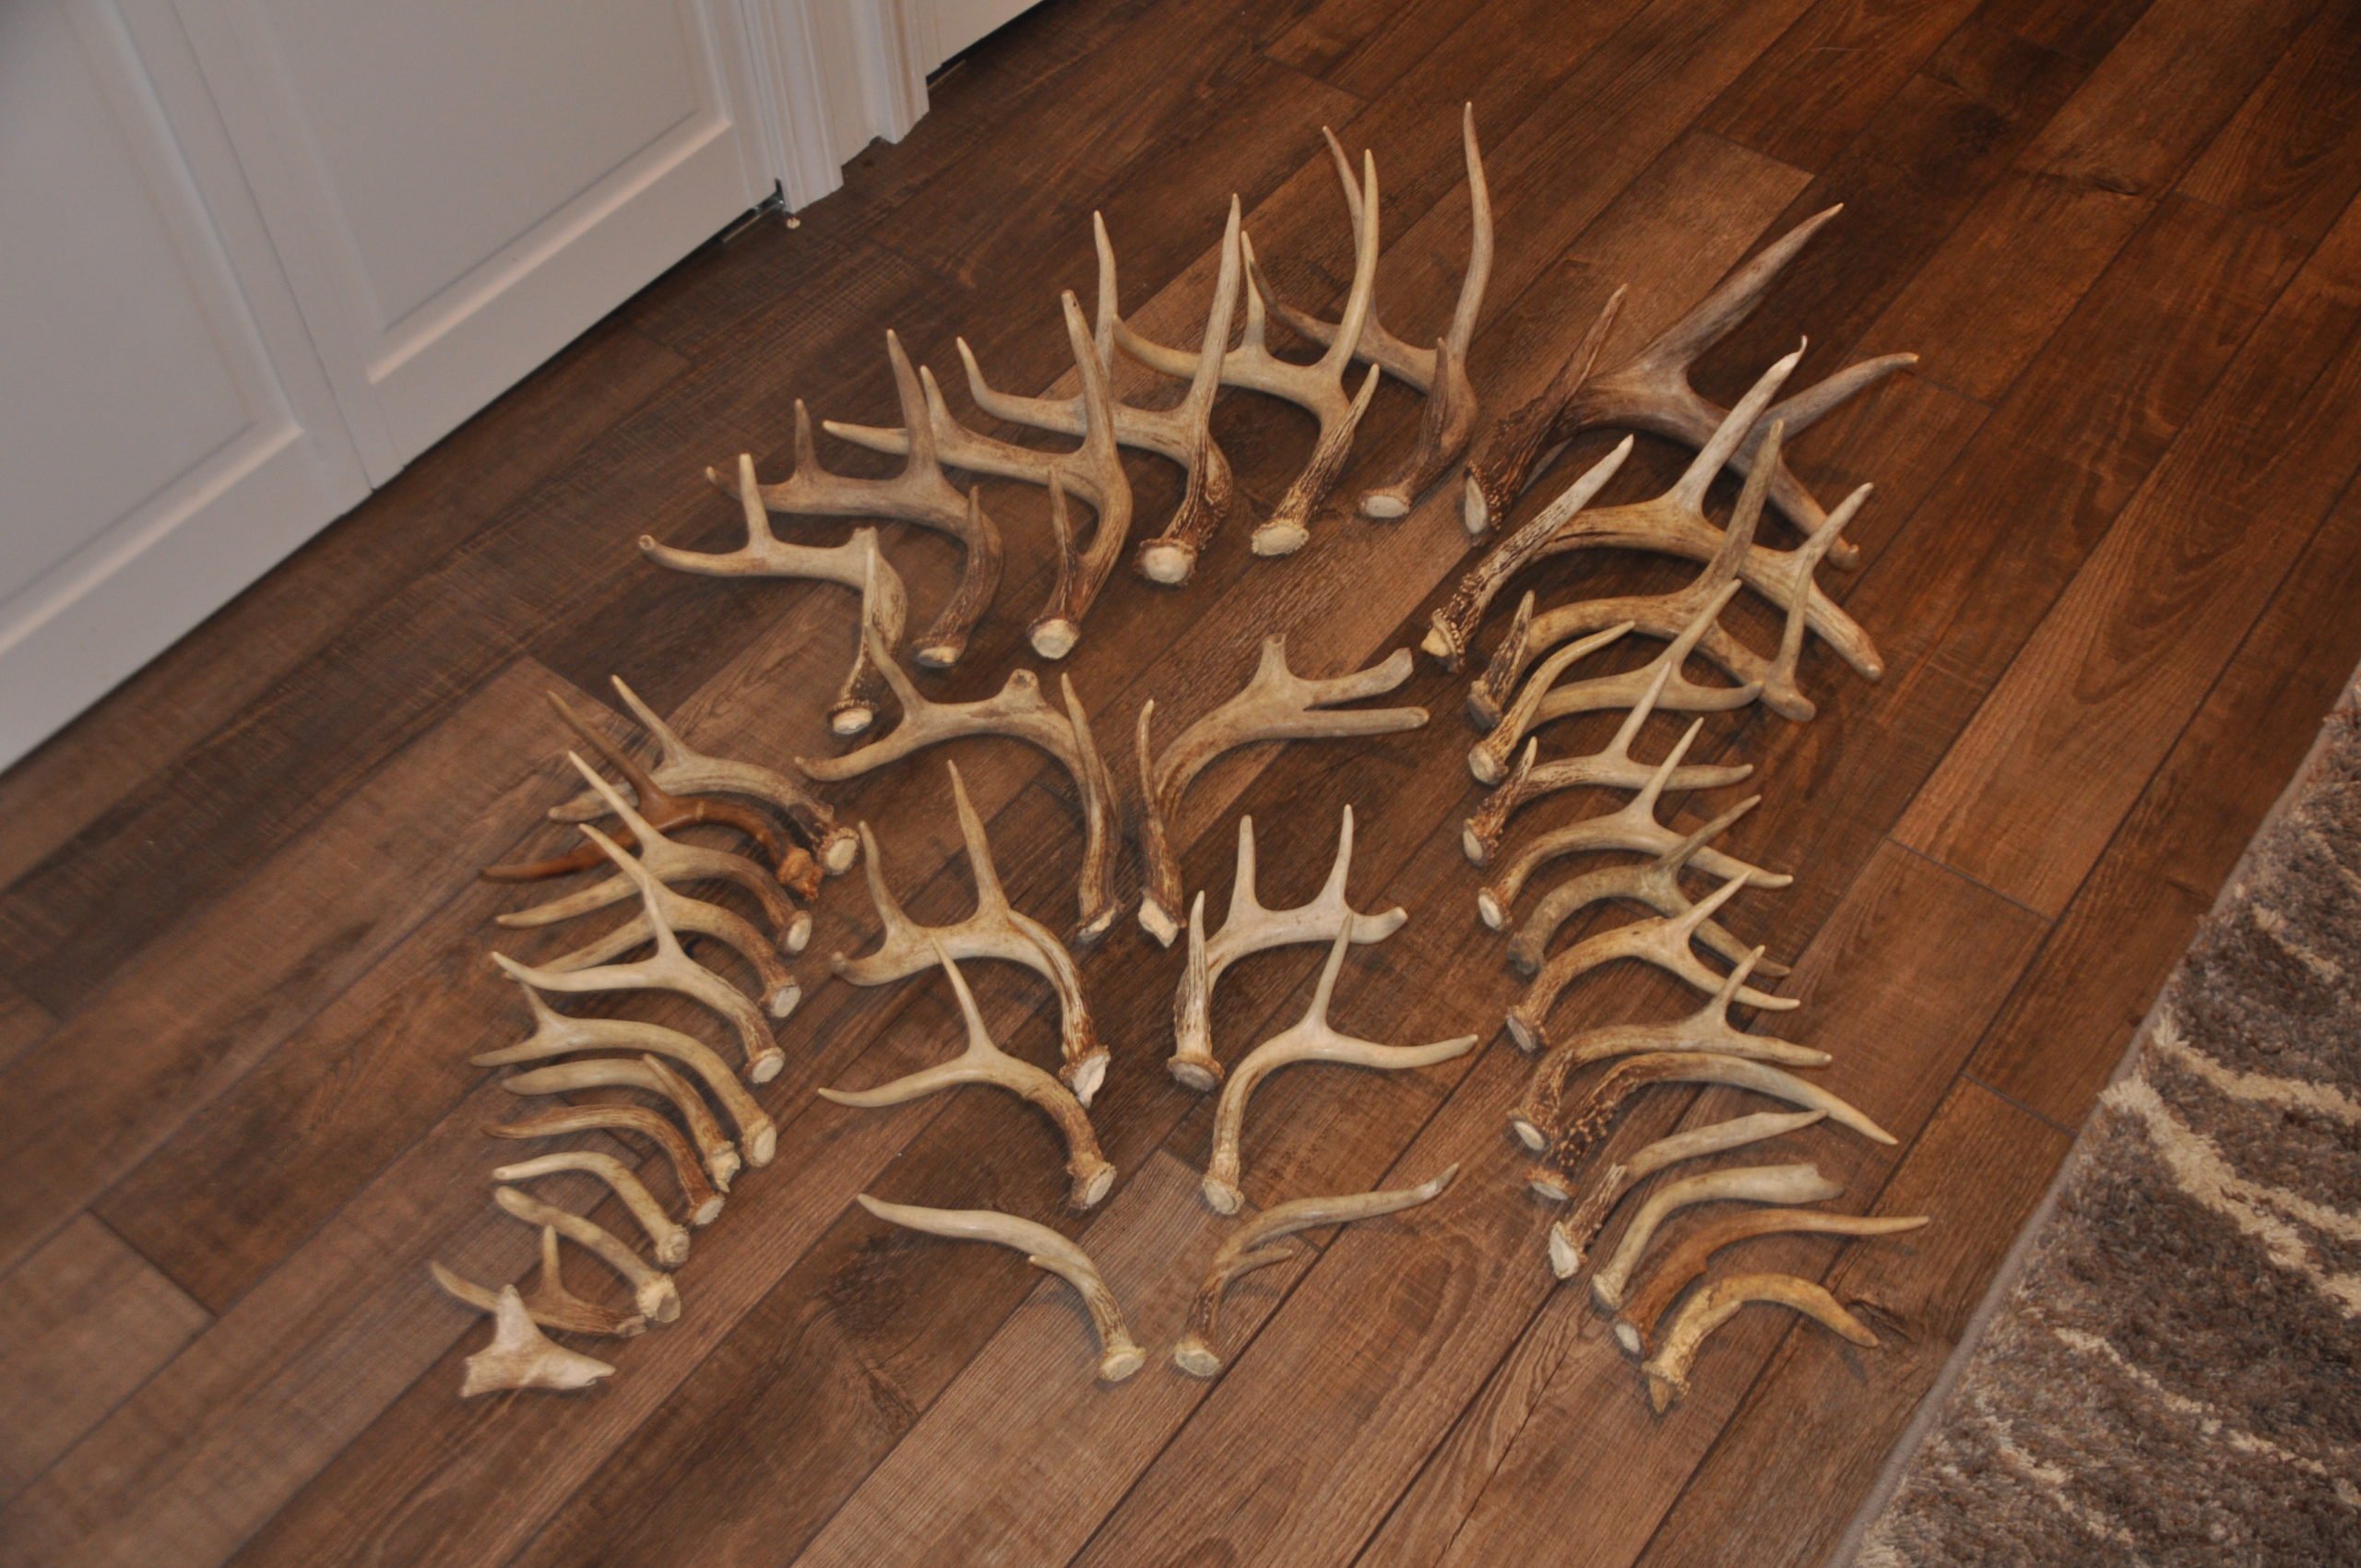 A pile of shed antlers.